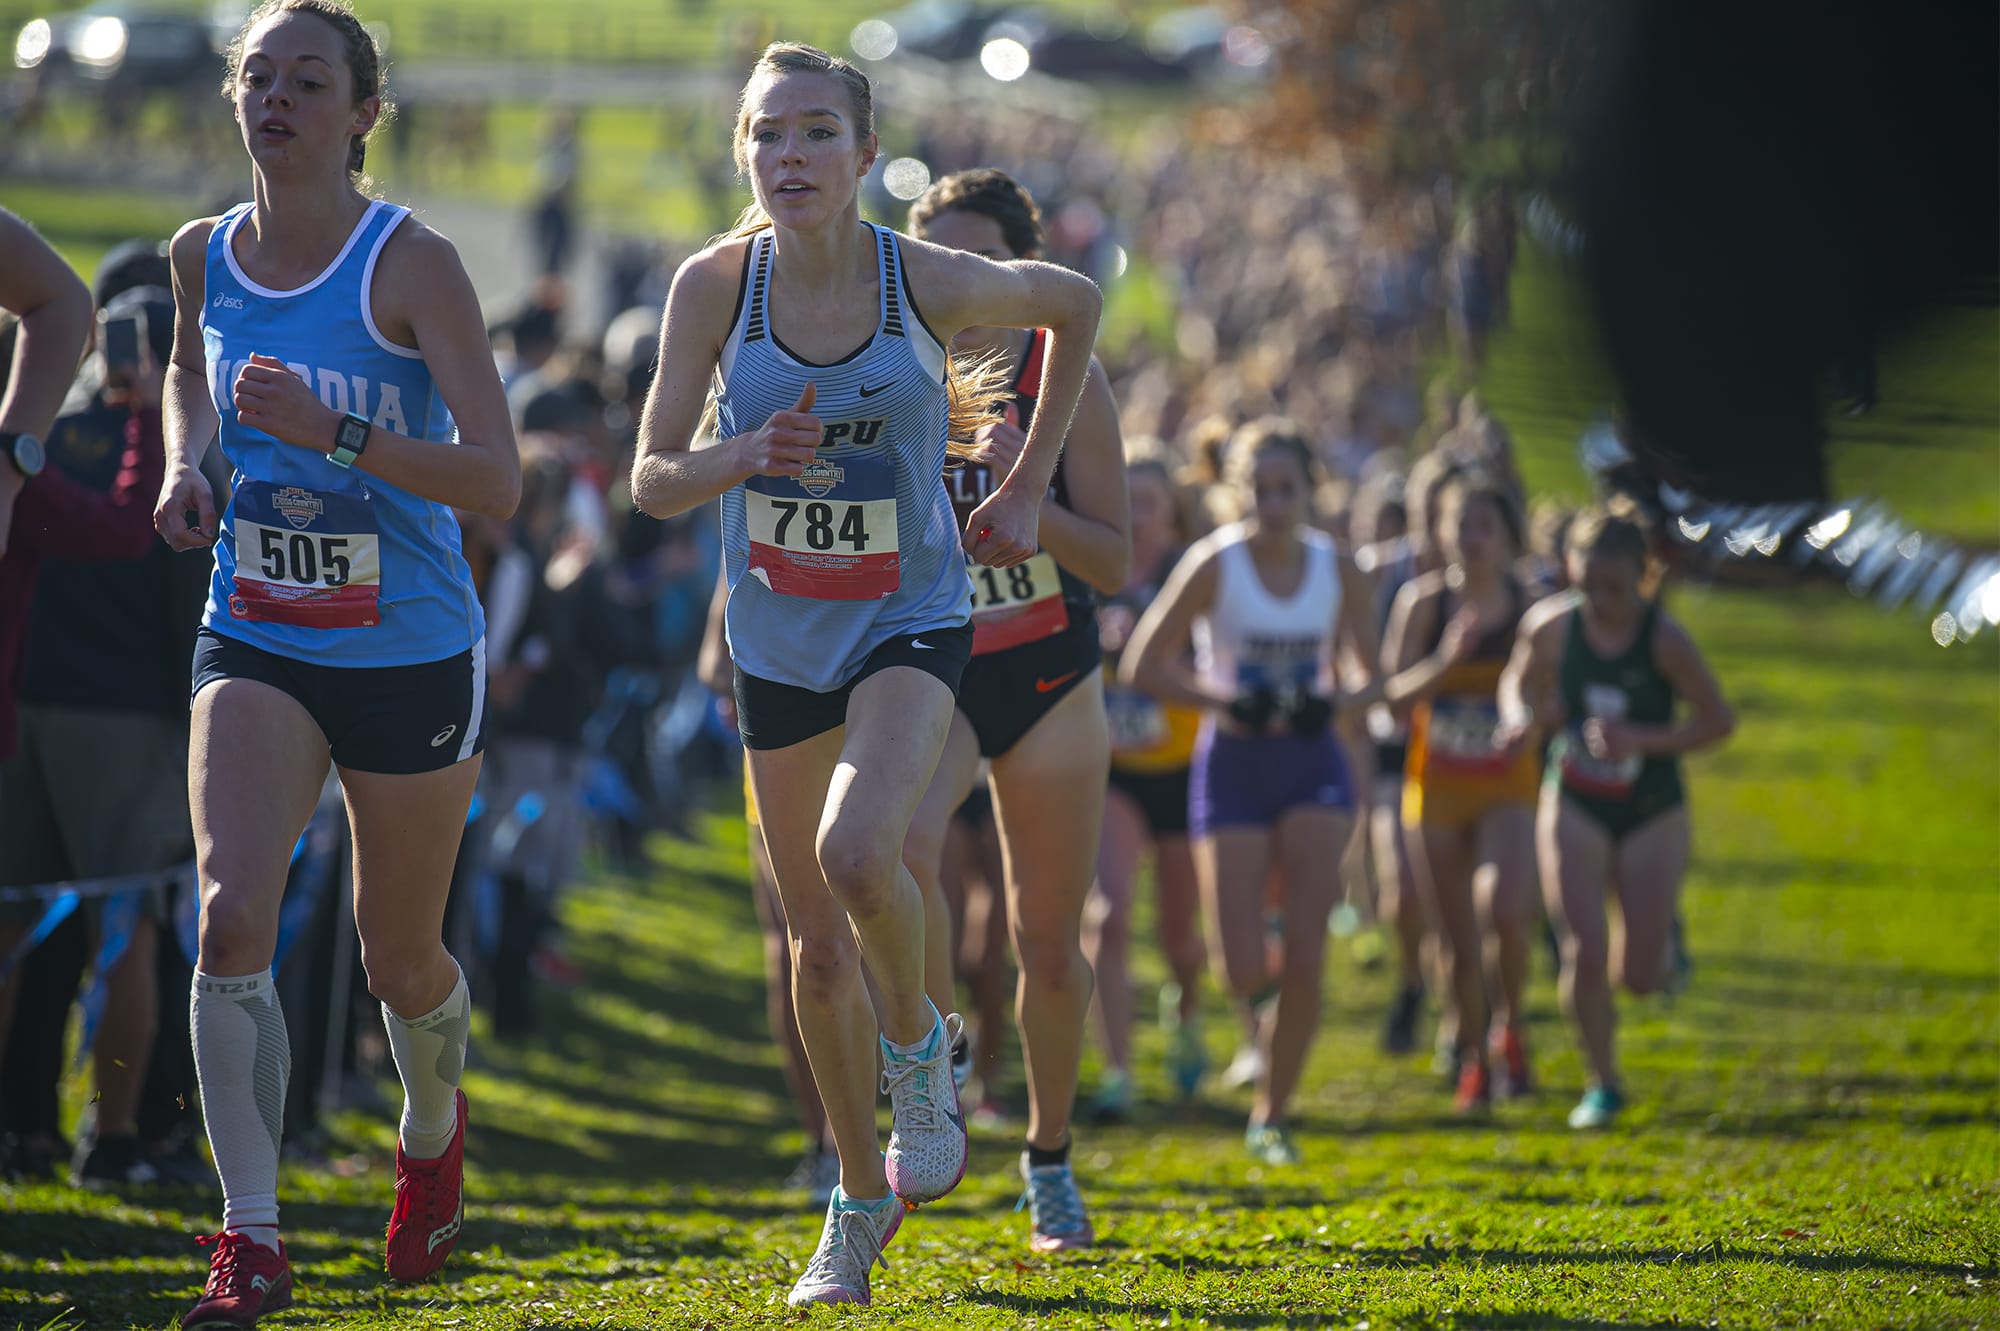 Warner Pacific’s Amelia Pullen, right, competes in the women’s 5 kilometer race during the NAIA Cross Country National Championships on Friday morning, Nov. 22, 2019.